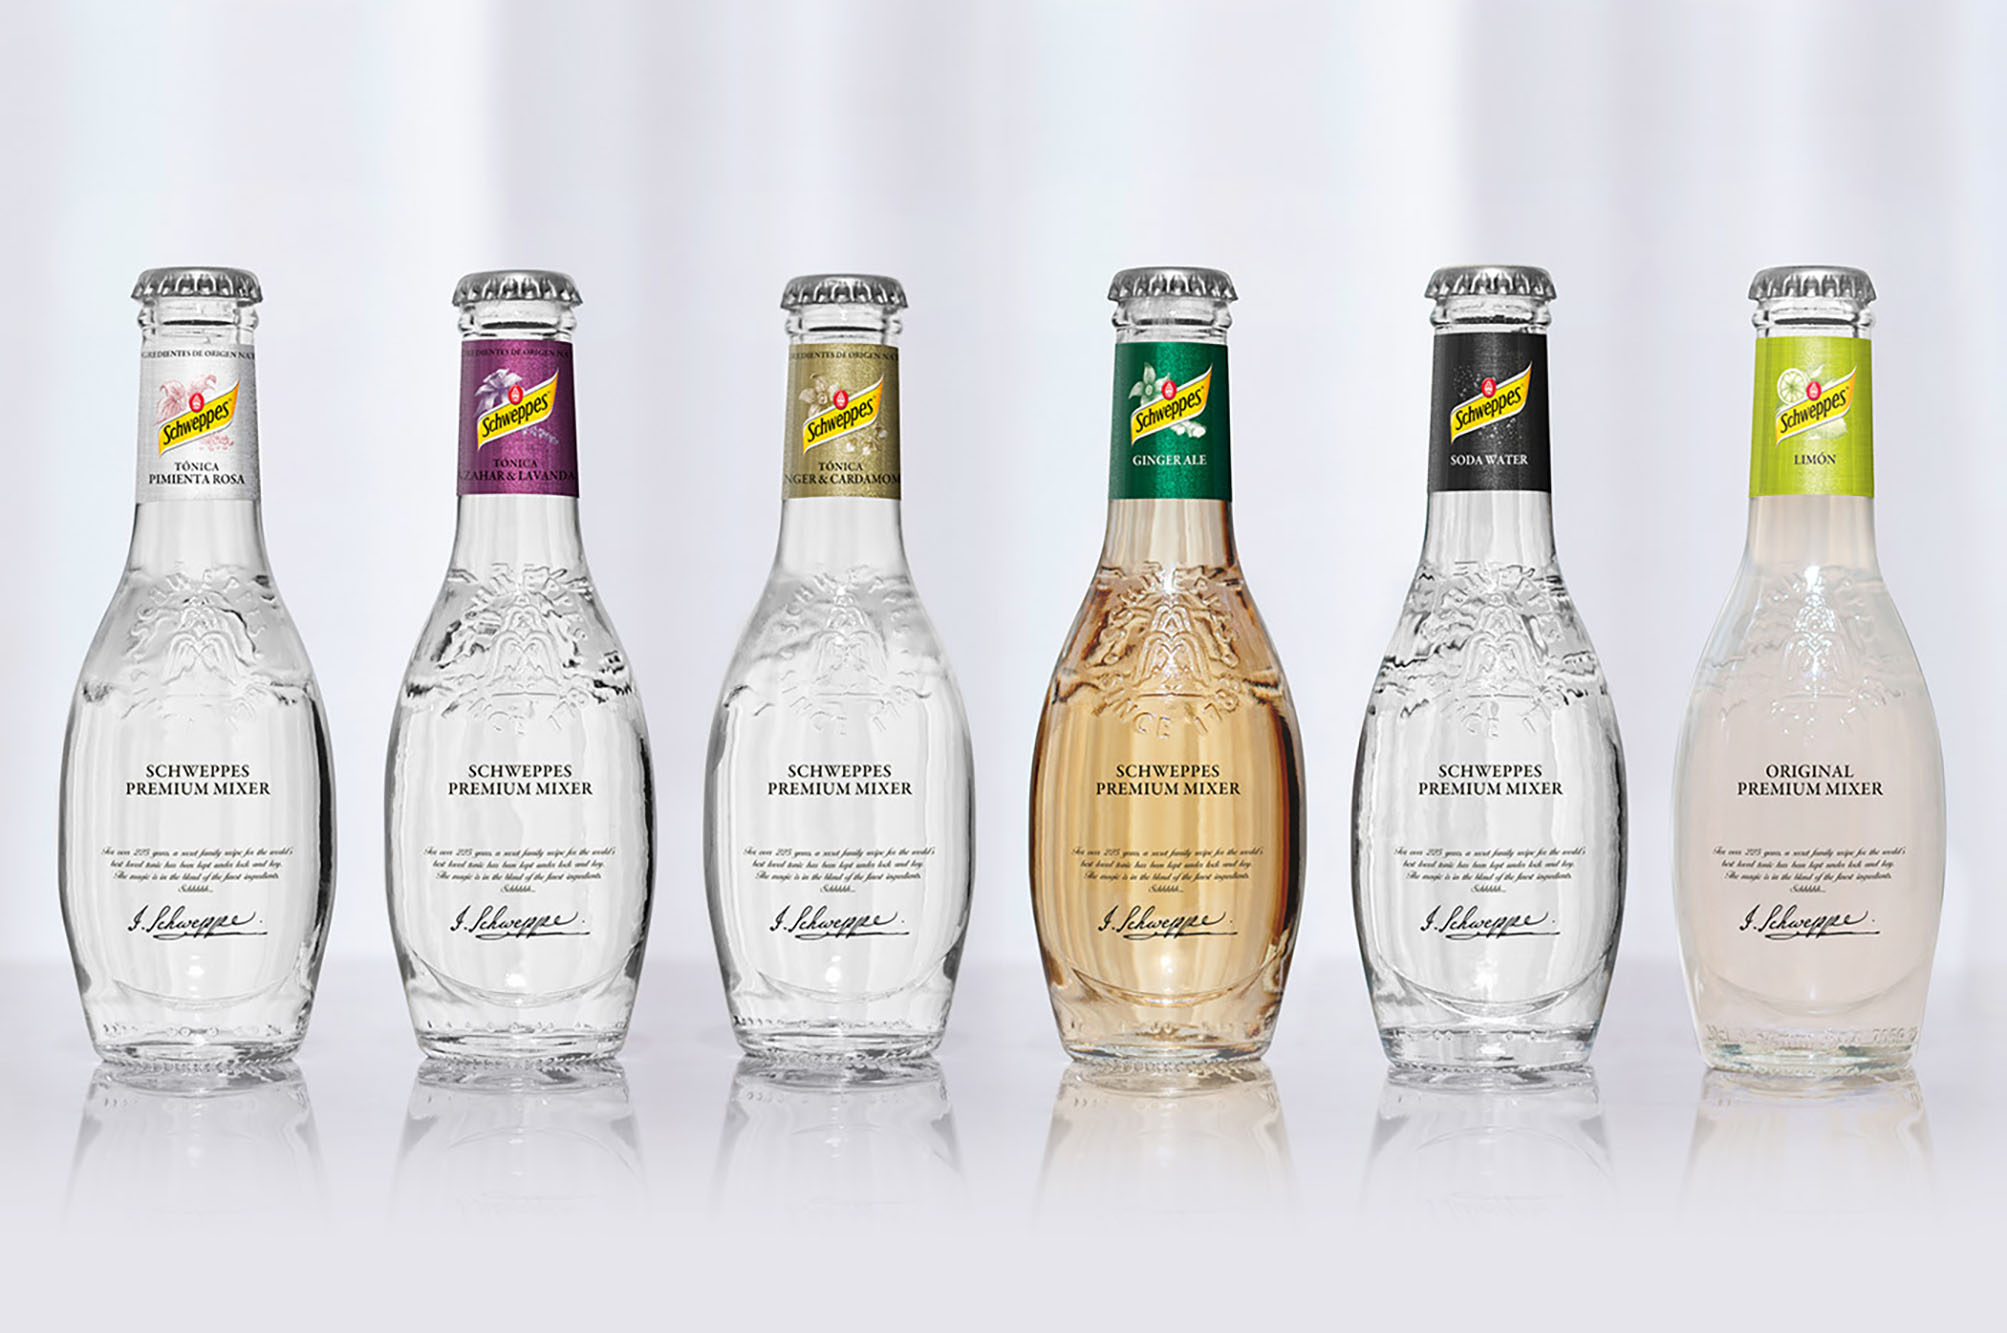 Unique and Iconic Bottle Designed by Morillas Branding Agency for Schweppes Premium Mixer